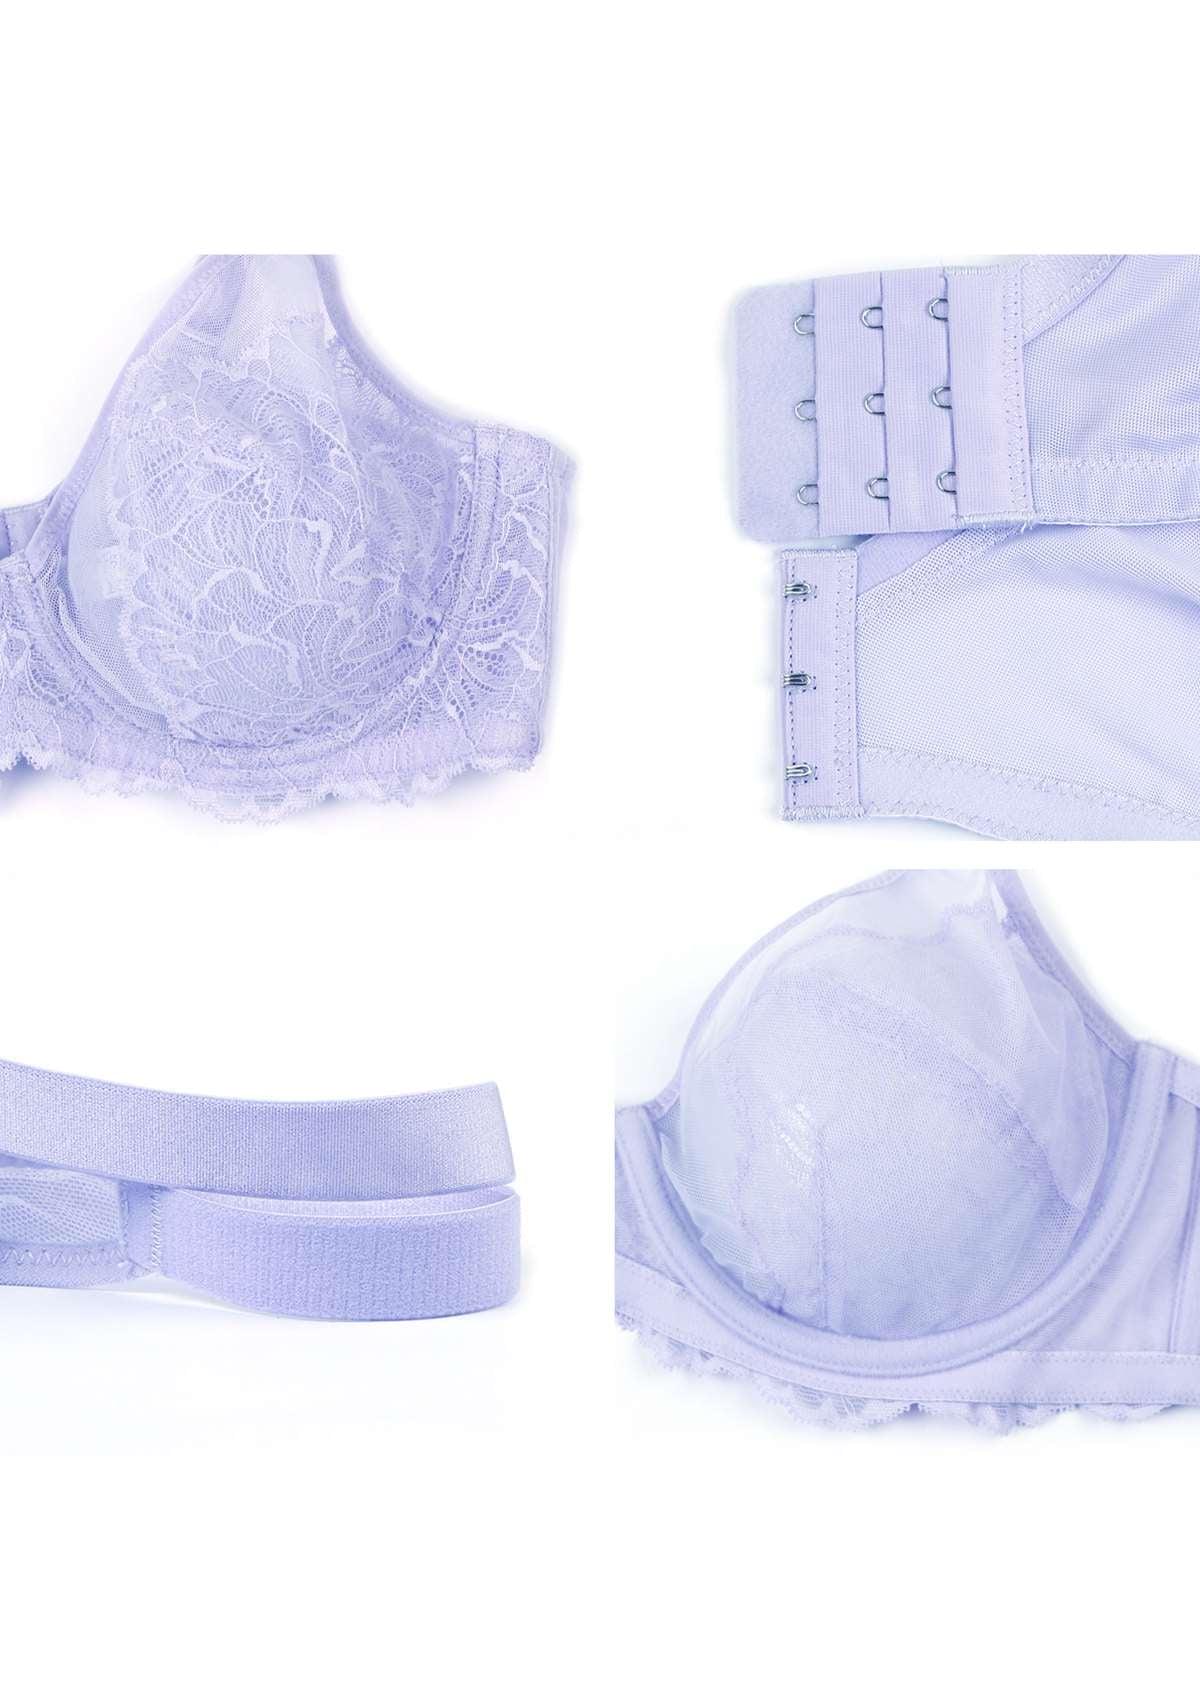 HSIA Blossom Transparent Lace Bra: Plus Size Wired Back Smoothing Bra - Light Purple / 38 / D